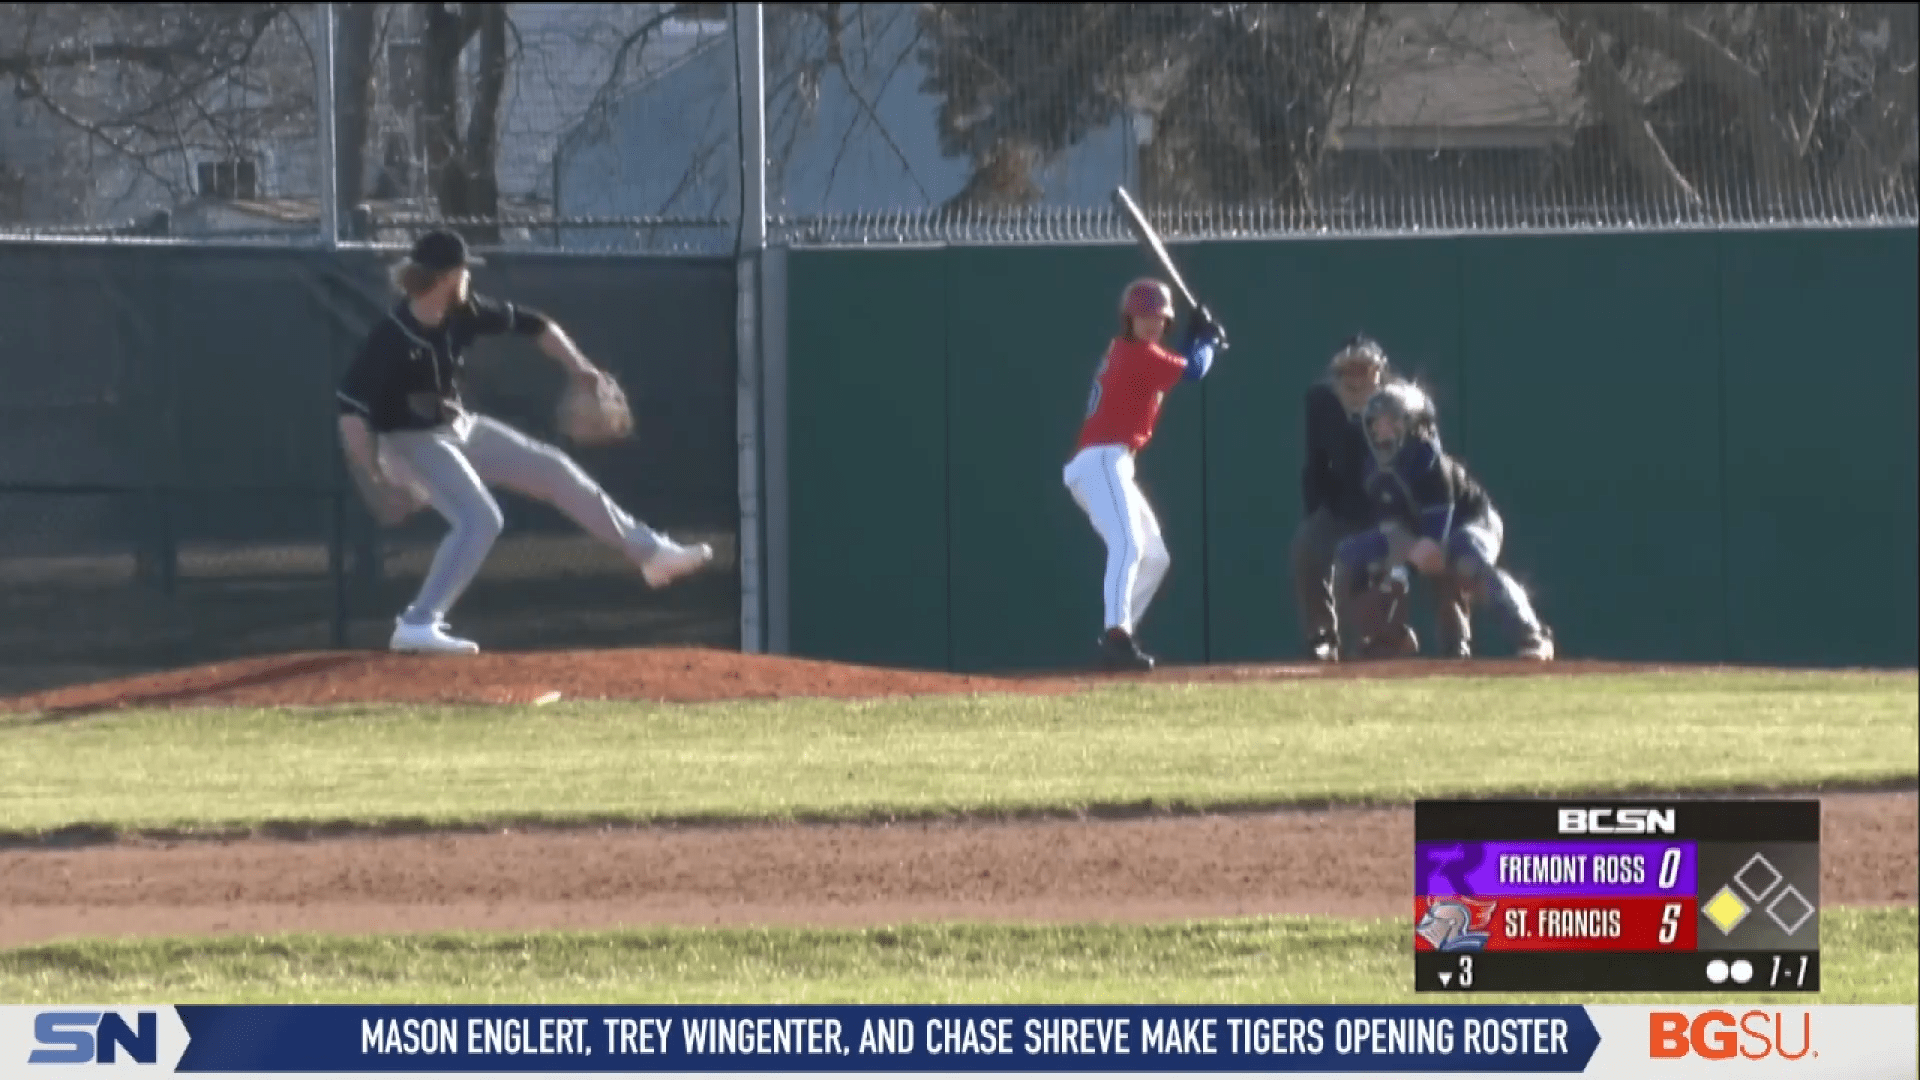 St Francis Beats Fremont Ross Earns First Win For Edgell Bcsn